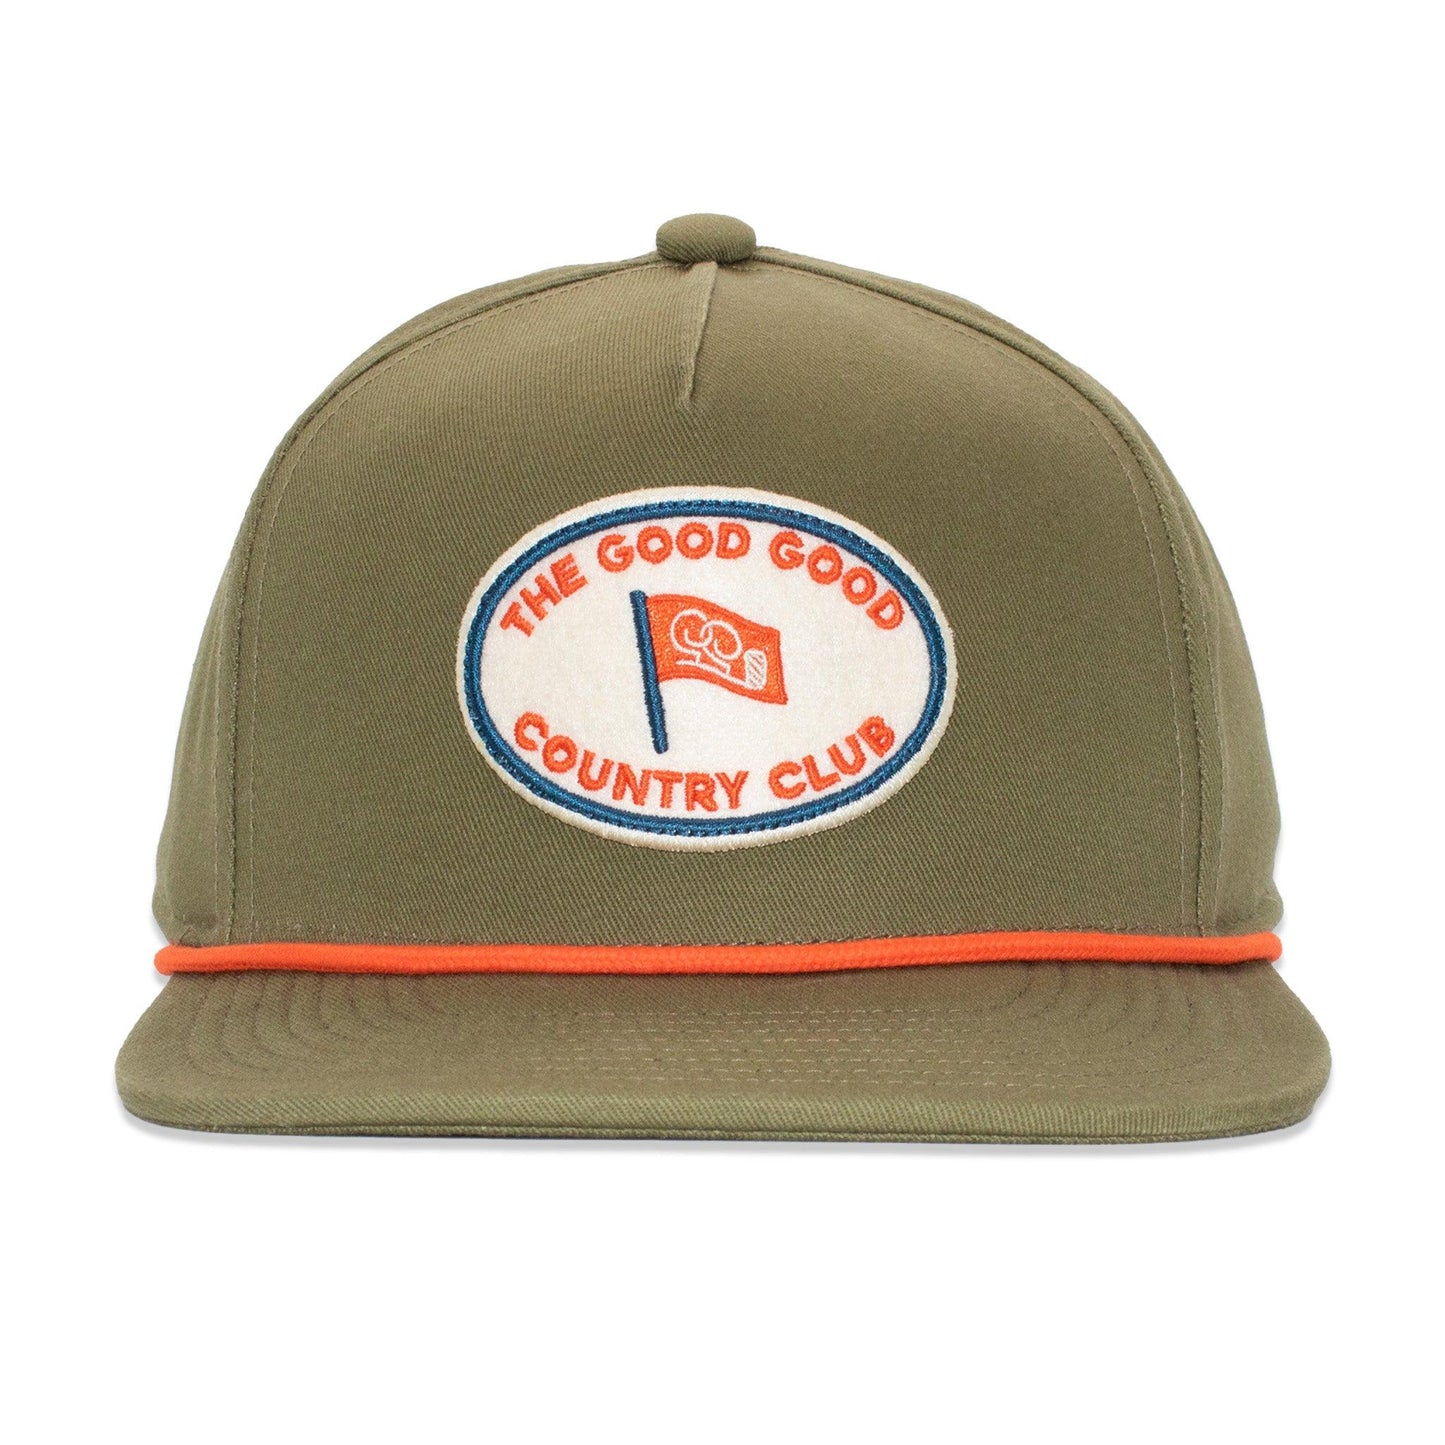 Country Club Rope Hat - Exclusive Rope Hat From Good Good